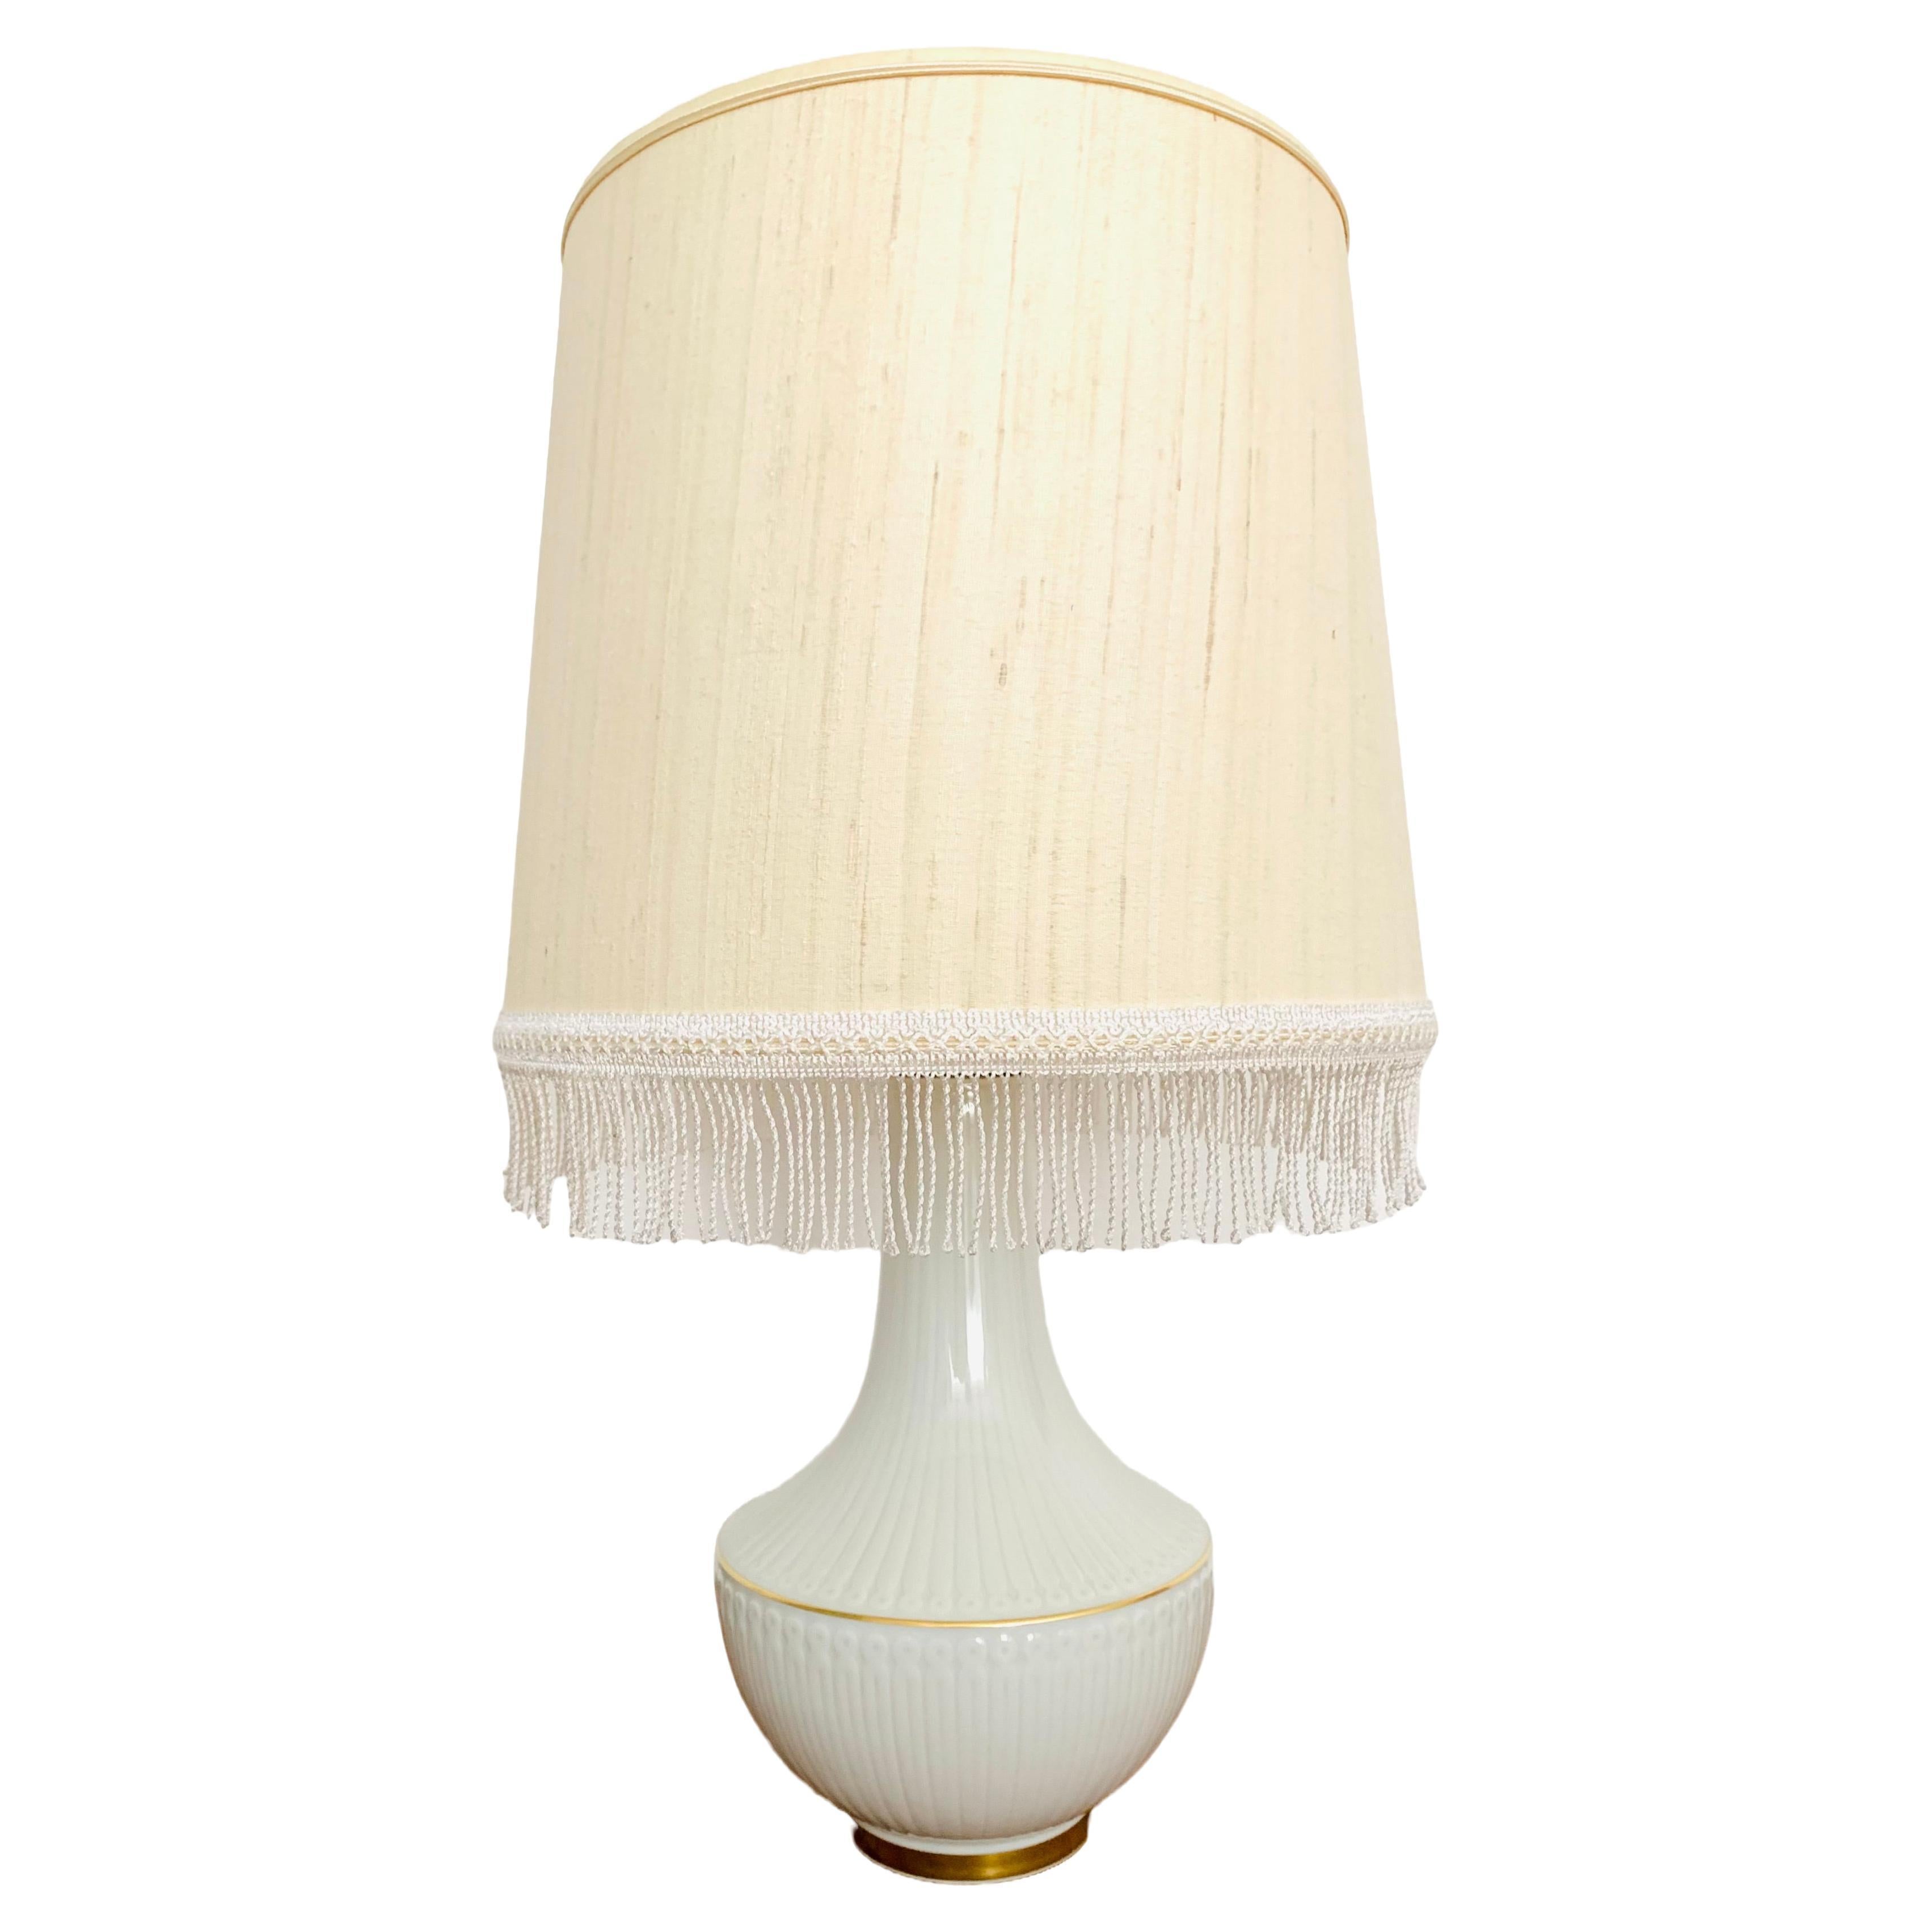 Porcelain Table Lamp by Hutschenreuther